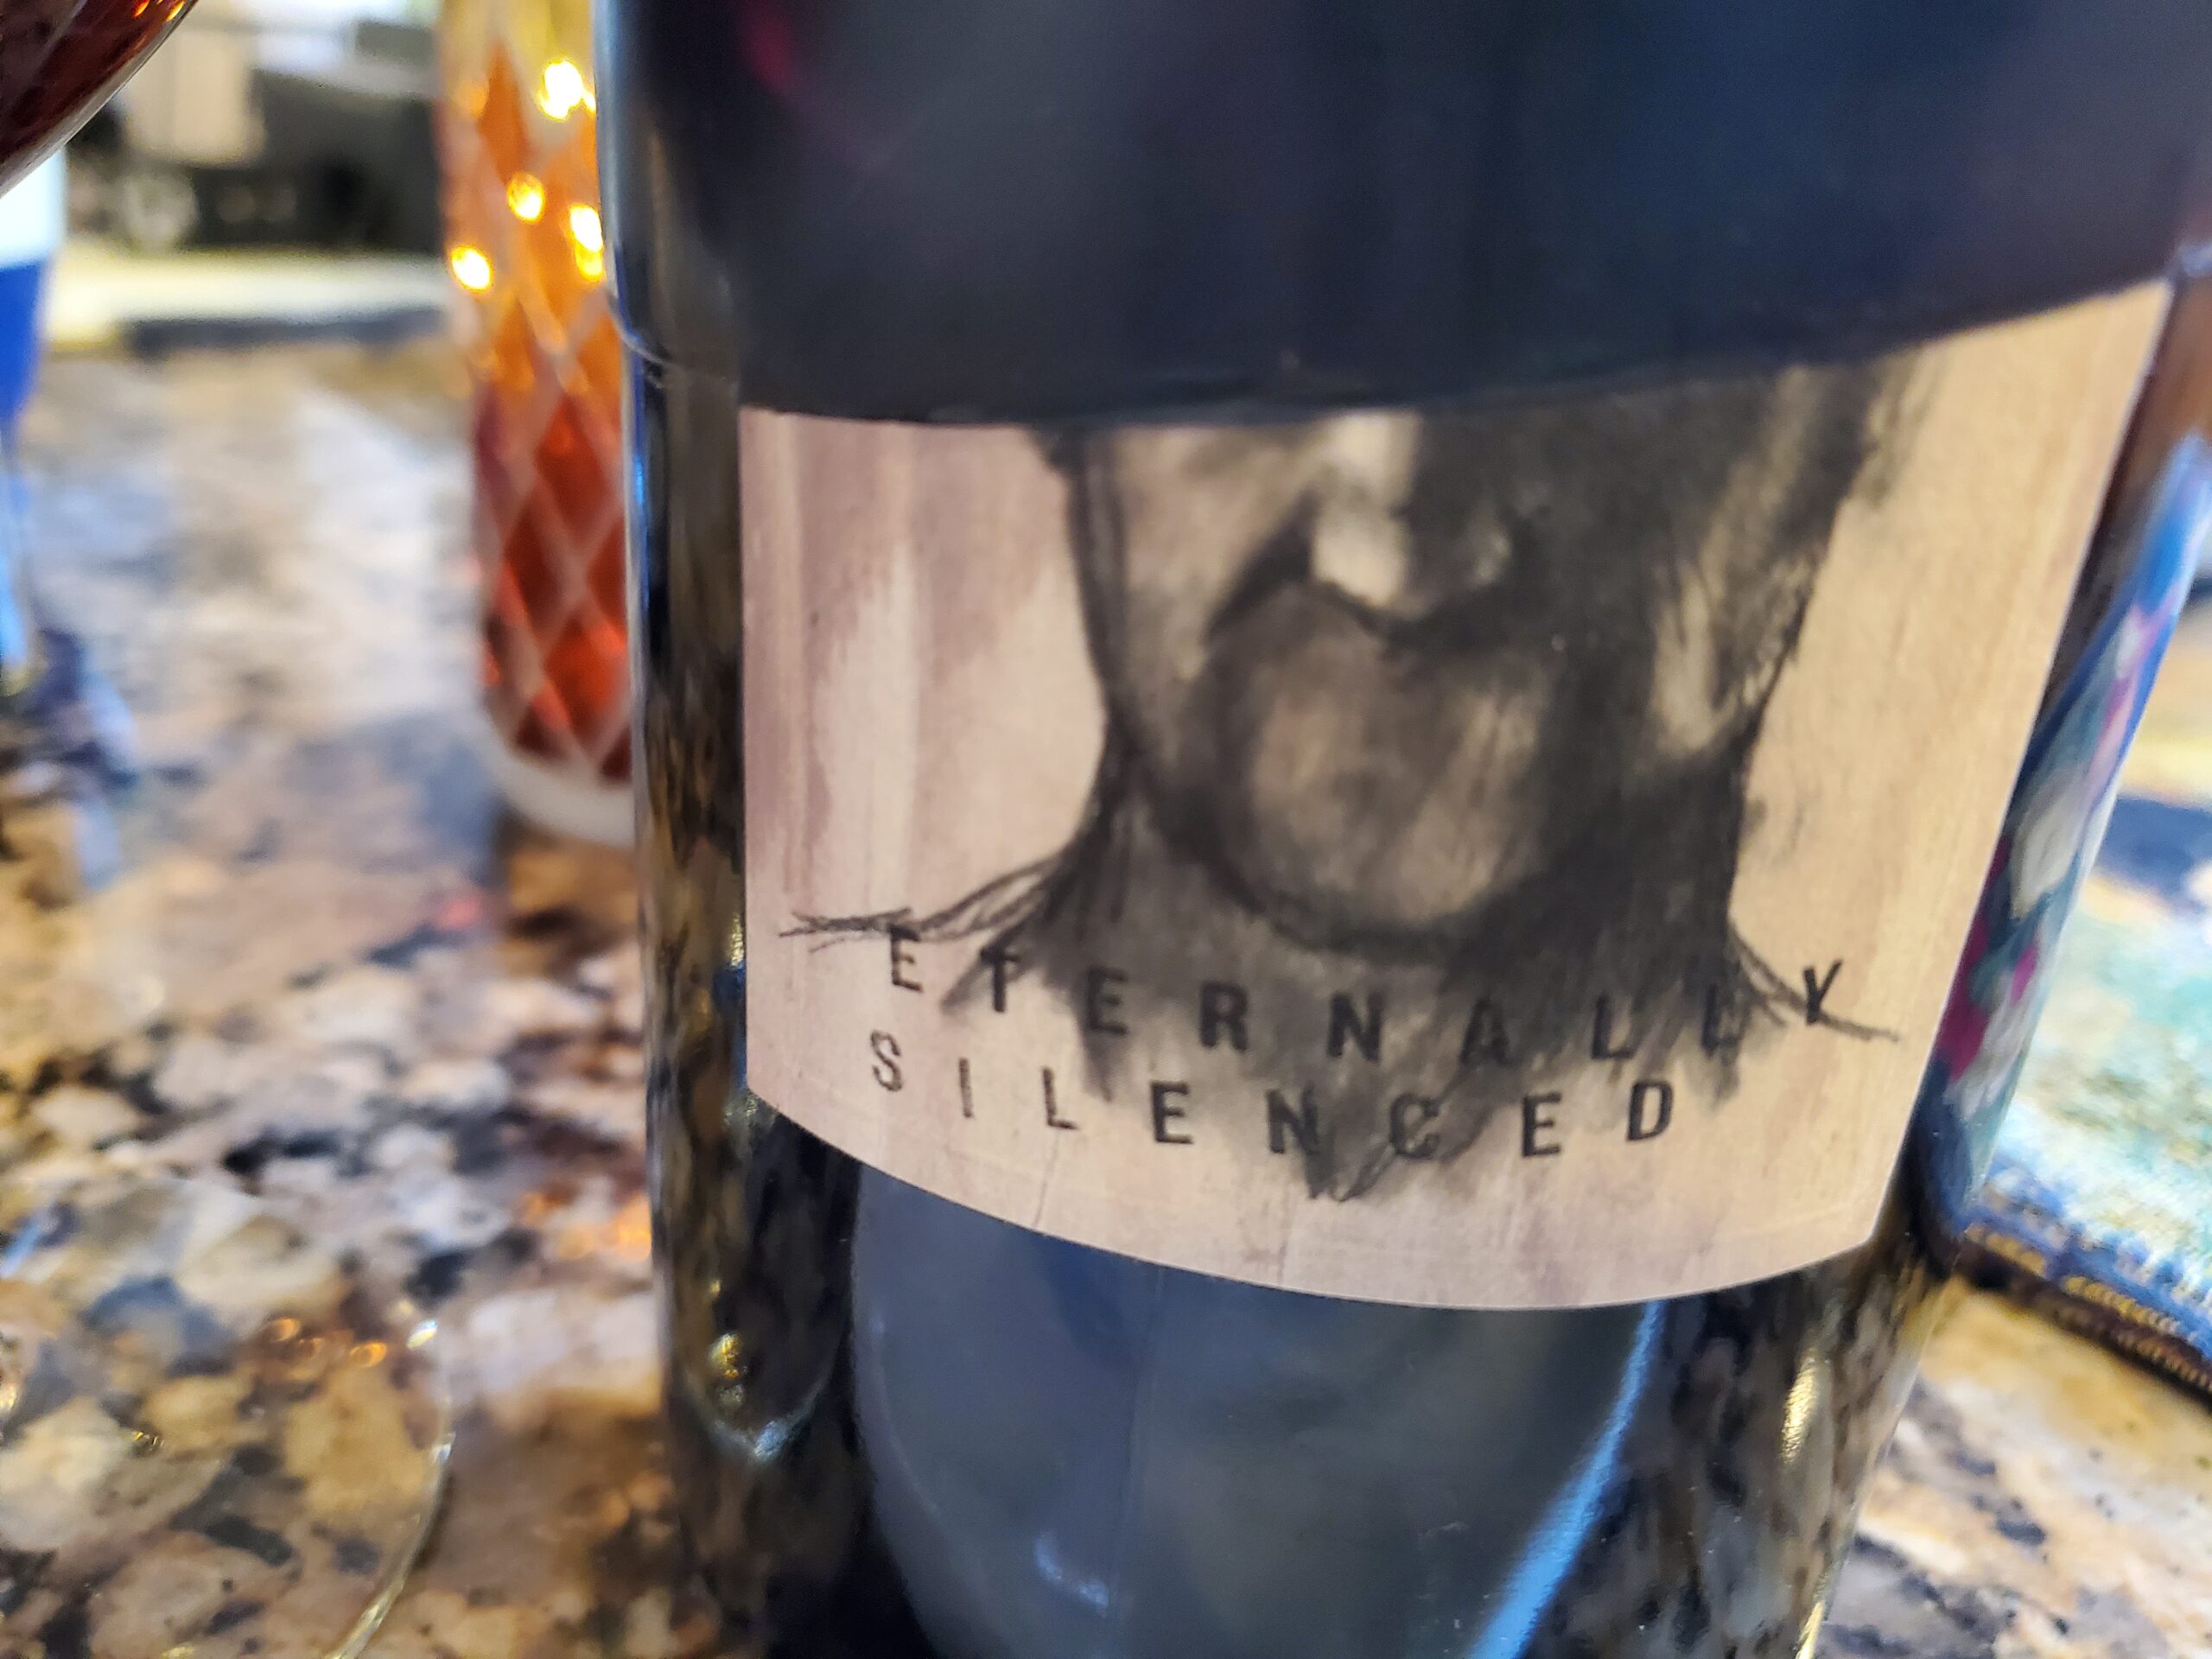 Two wines that can't be held hostage: Eternally Silenced Pinot